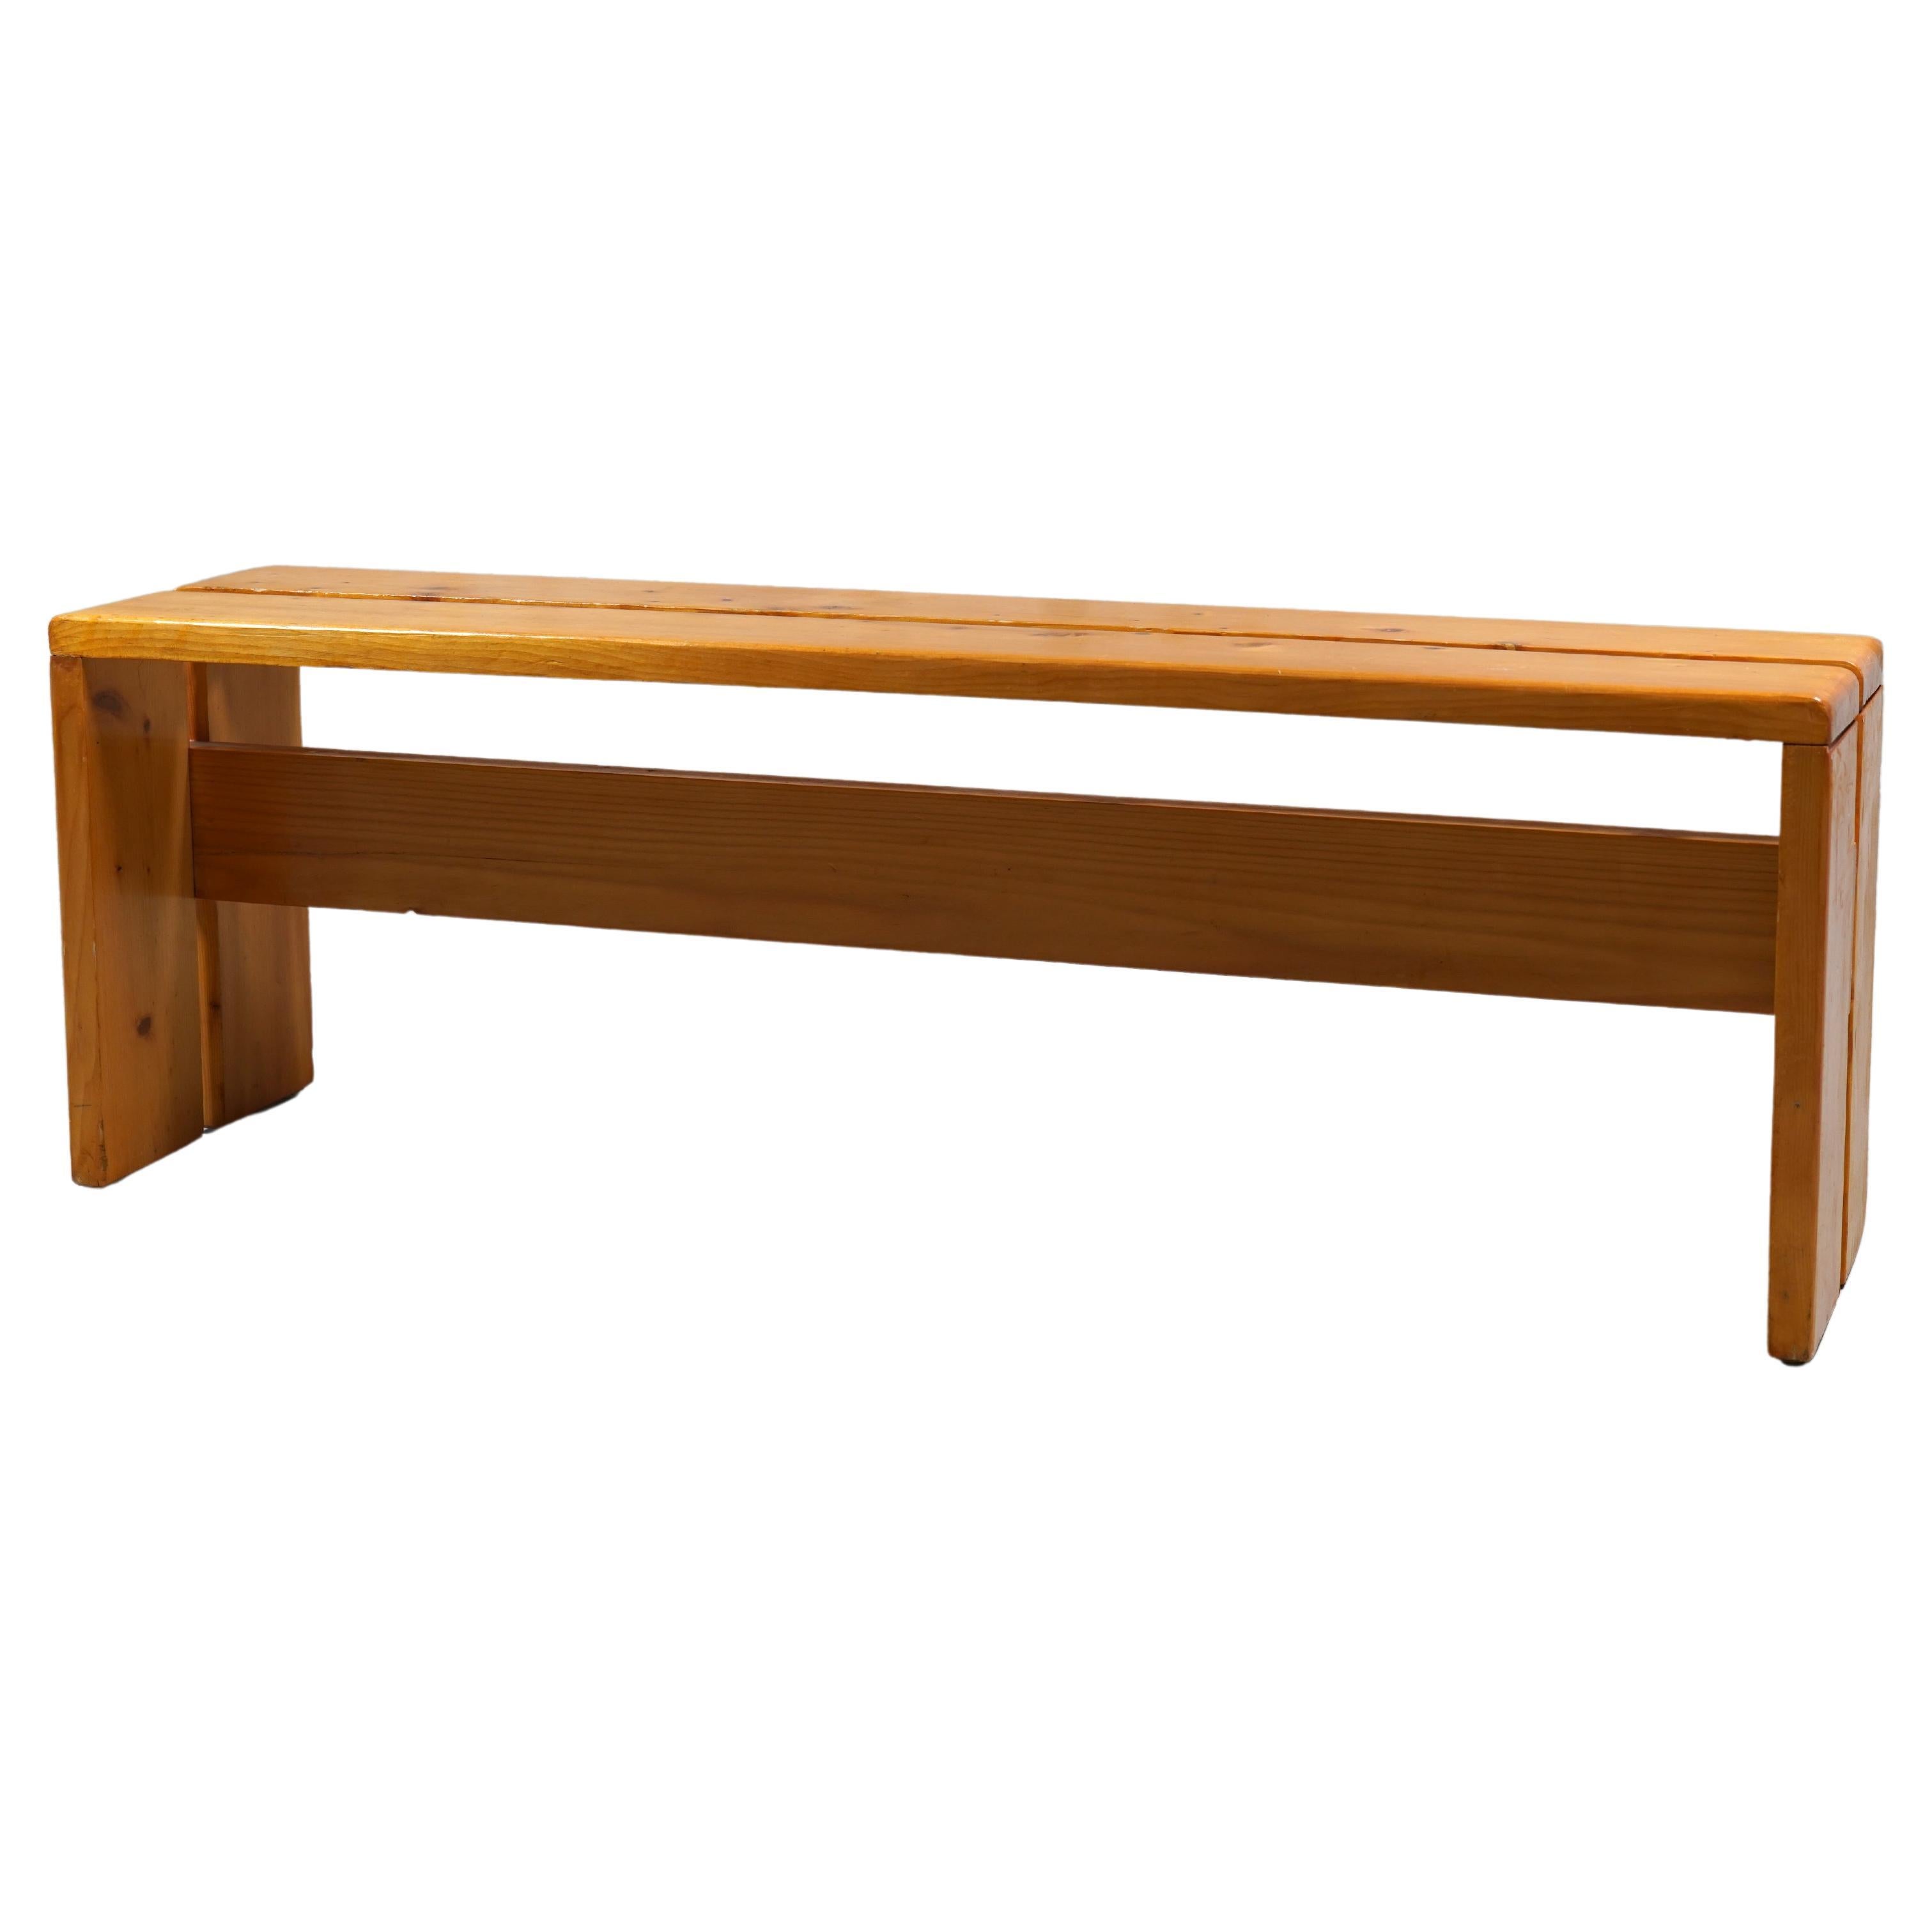 Charlotte Perriand Bench from Les Arcs, France circa 1968